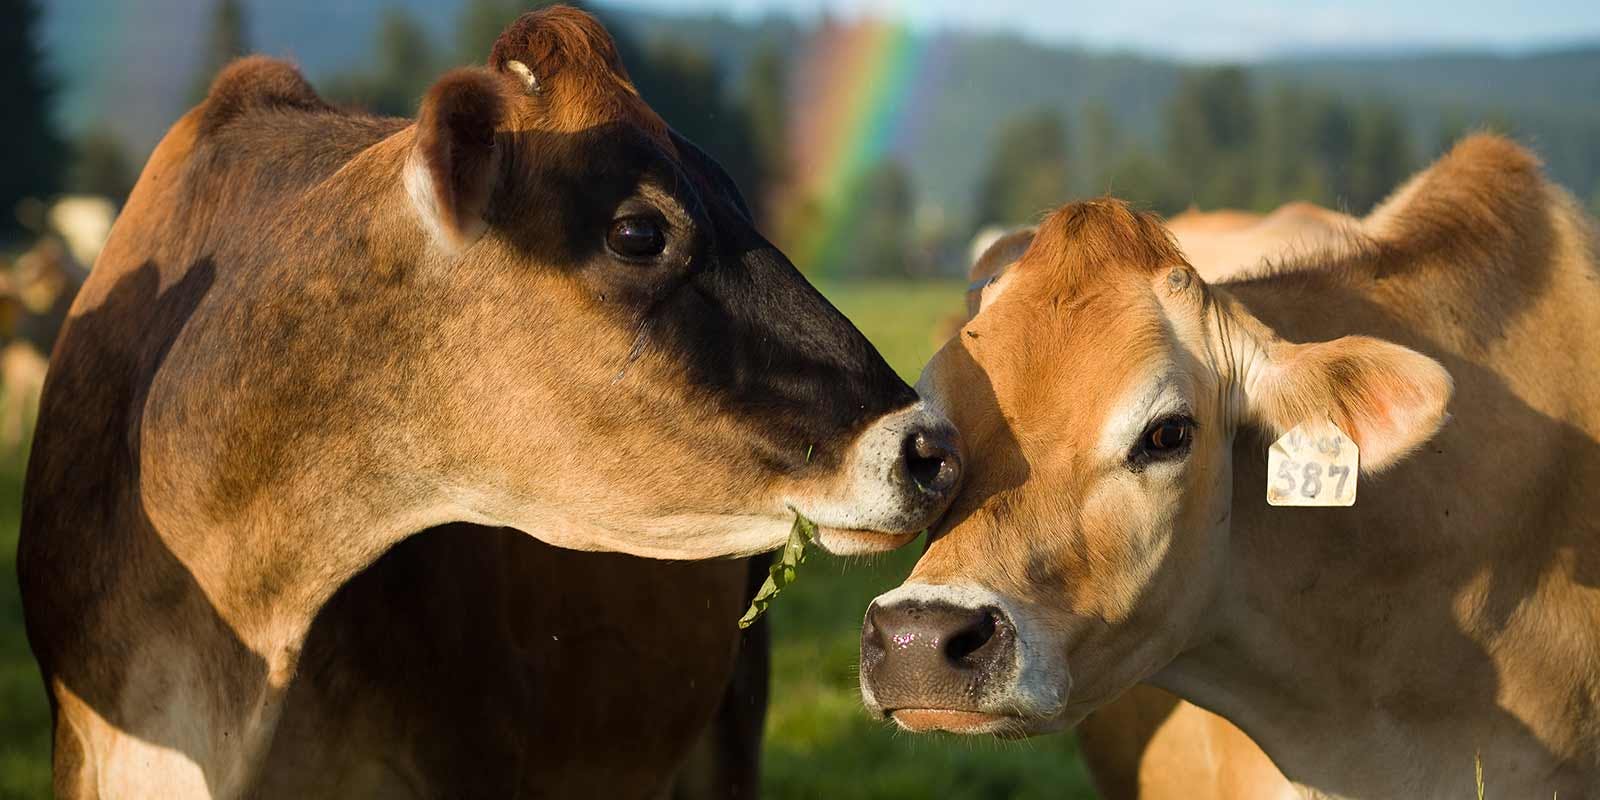 Two tan cows stand with their heads close together and a rainbow in the background.